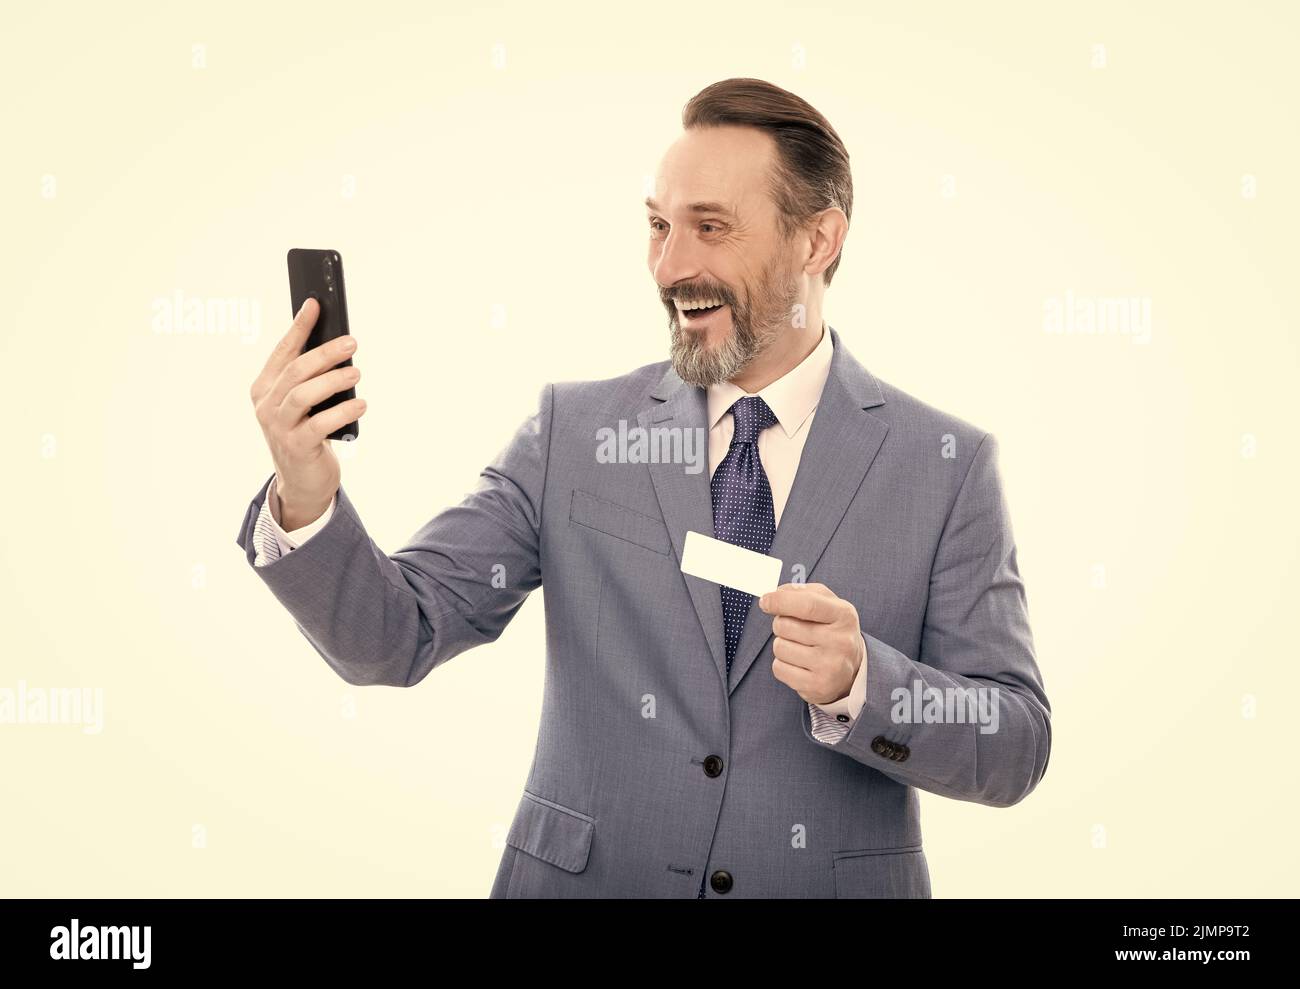 fast payment. making selfie. customer use online money on mobile phone. Stock Photo